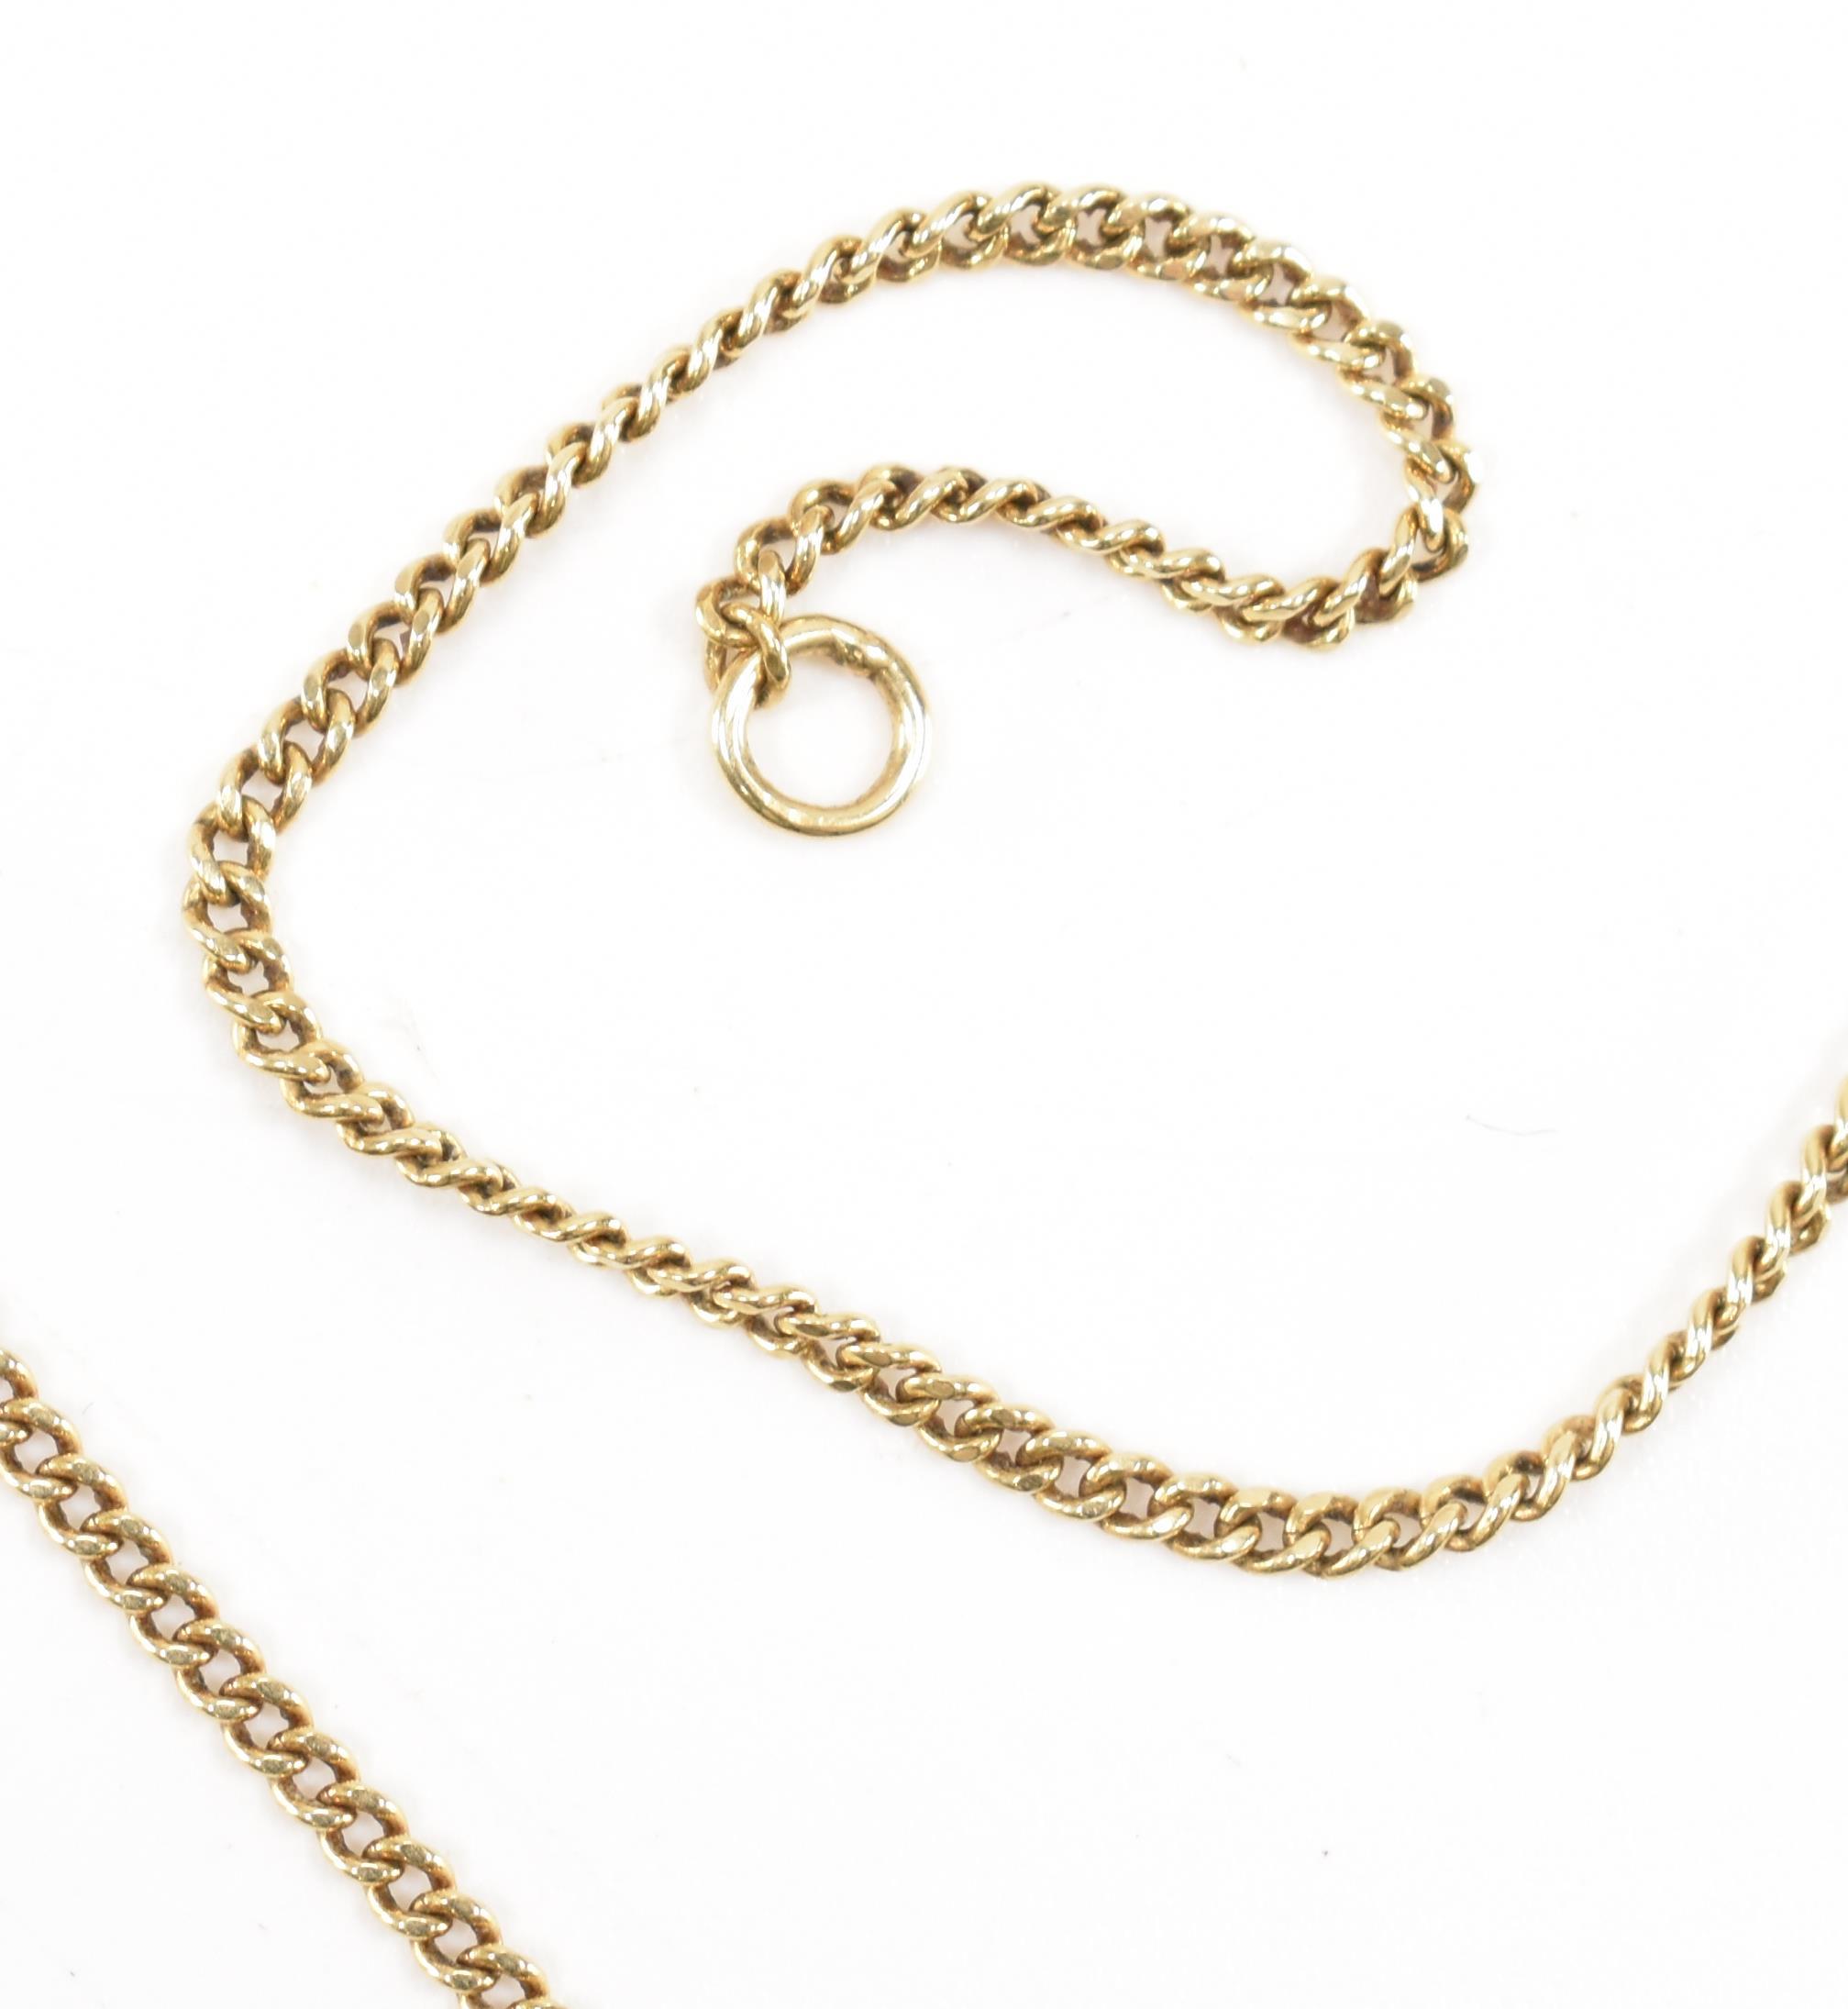 VINTAGE 9CT GOLD FINE LINK CHAIN NECKLACE - Image 3 of 6